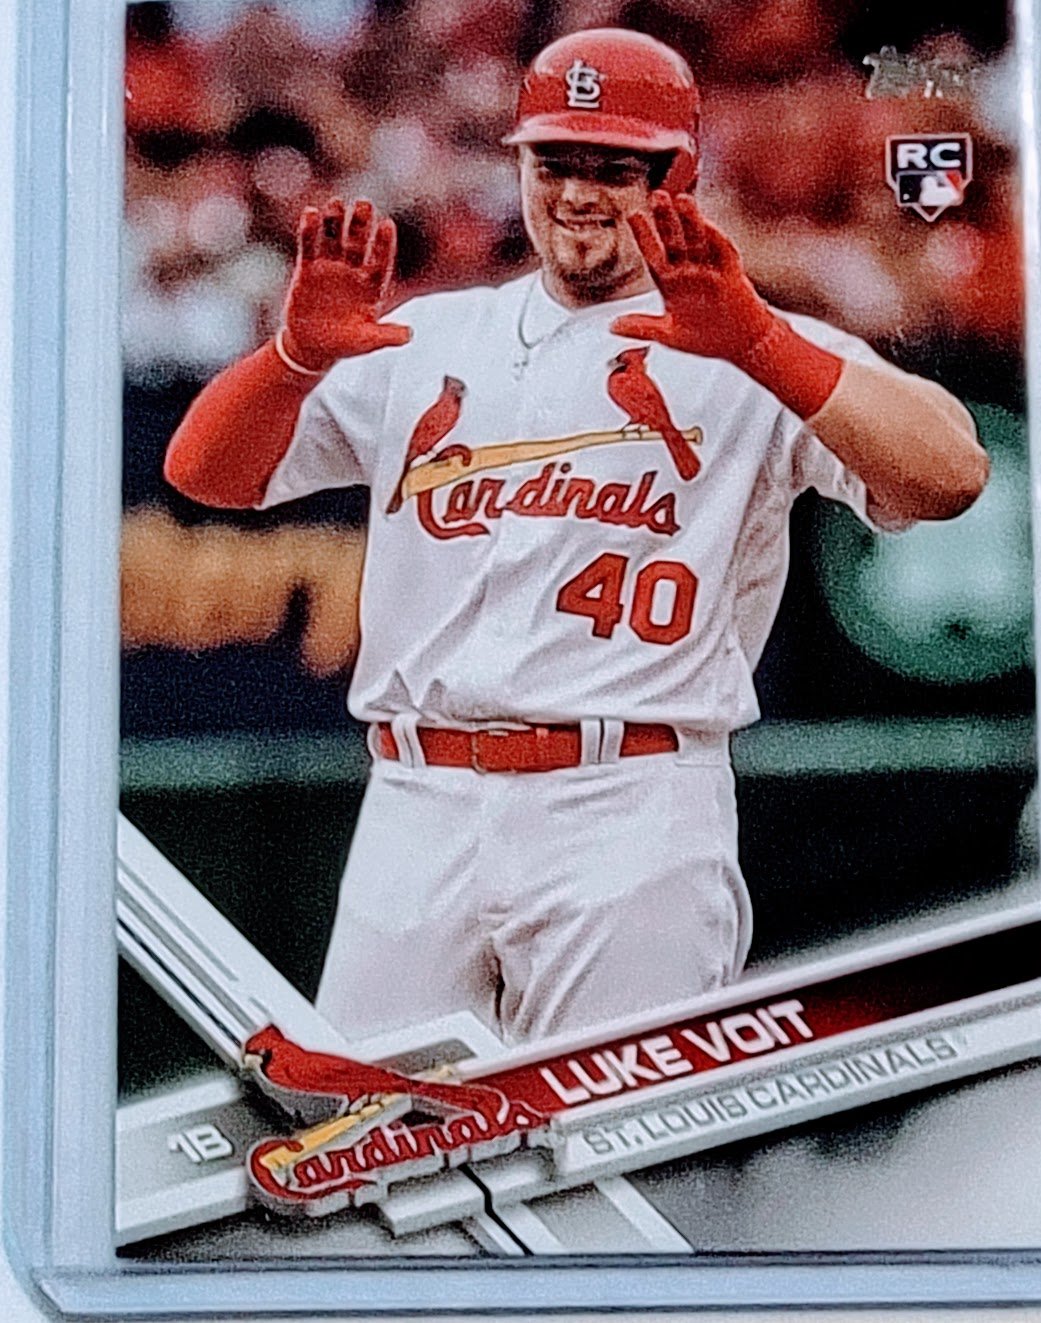 2017 Topps Update Luke Voit Rookie Baseball Card TPTV simple Xclusive Collectibles   